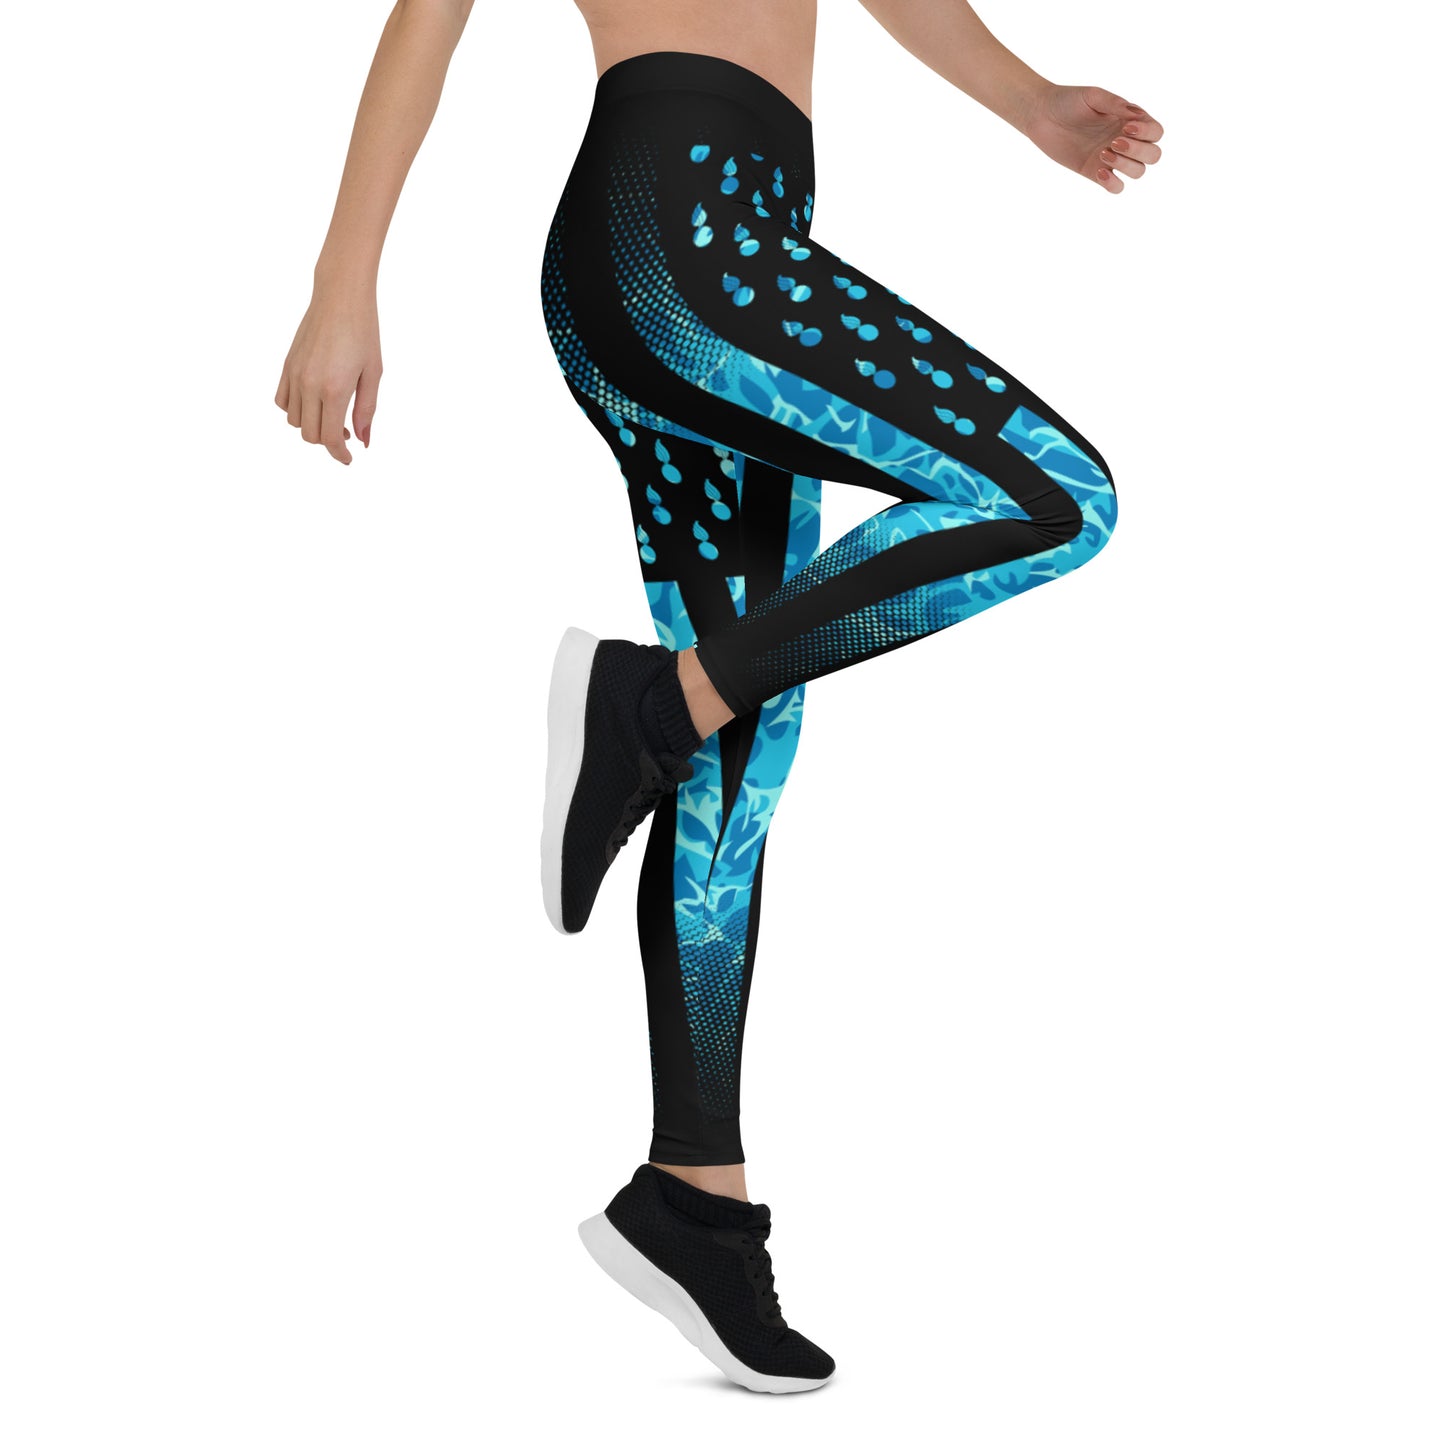 AMMO Black American Flag With Pisspots For Stars Above Under Water Pattern Leggings